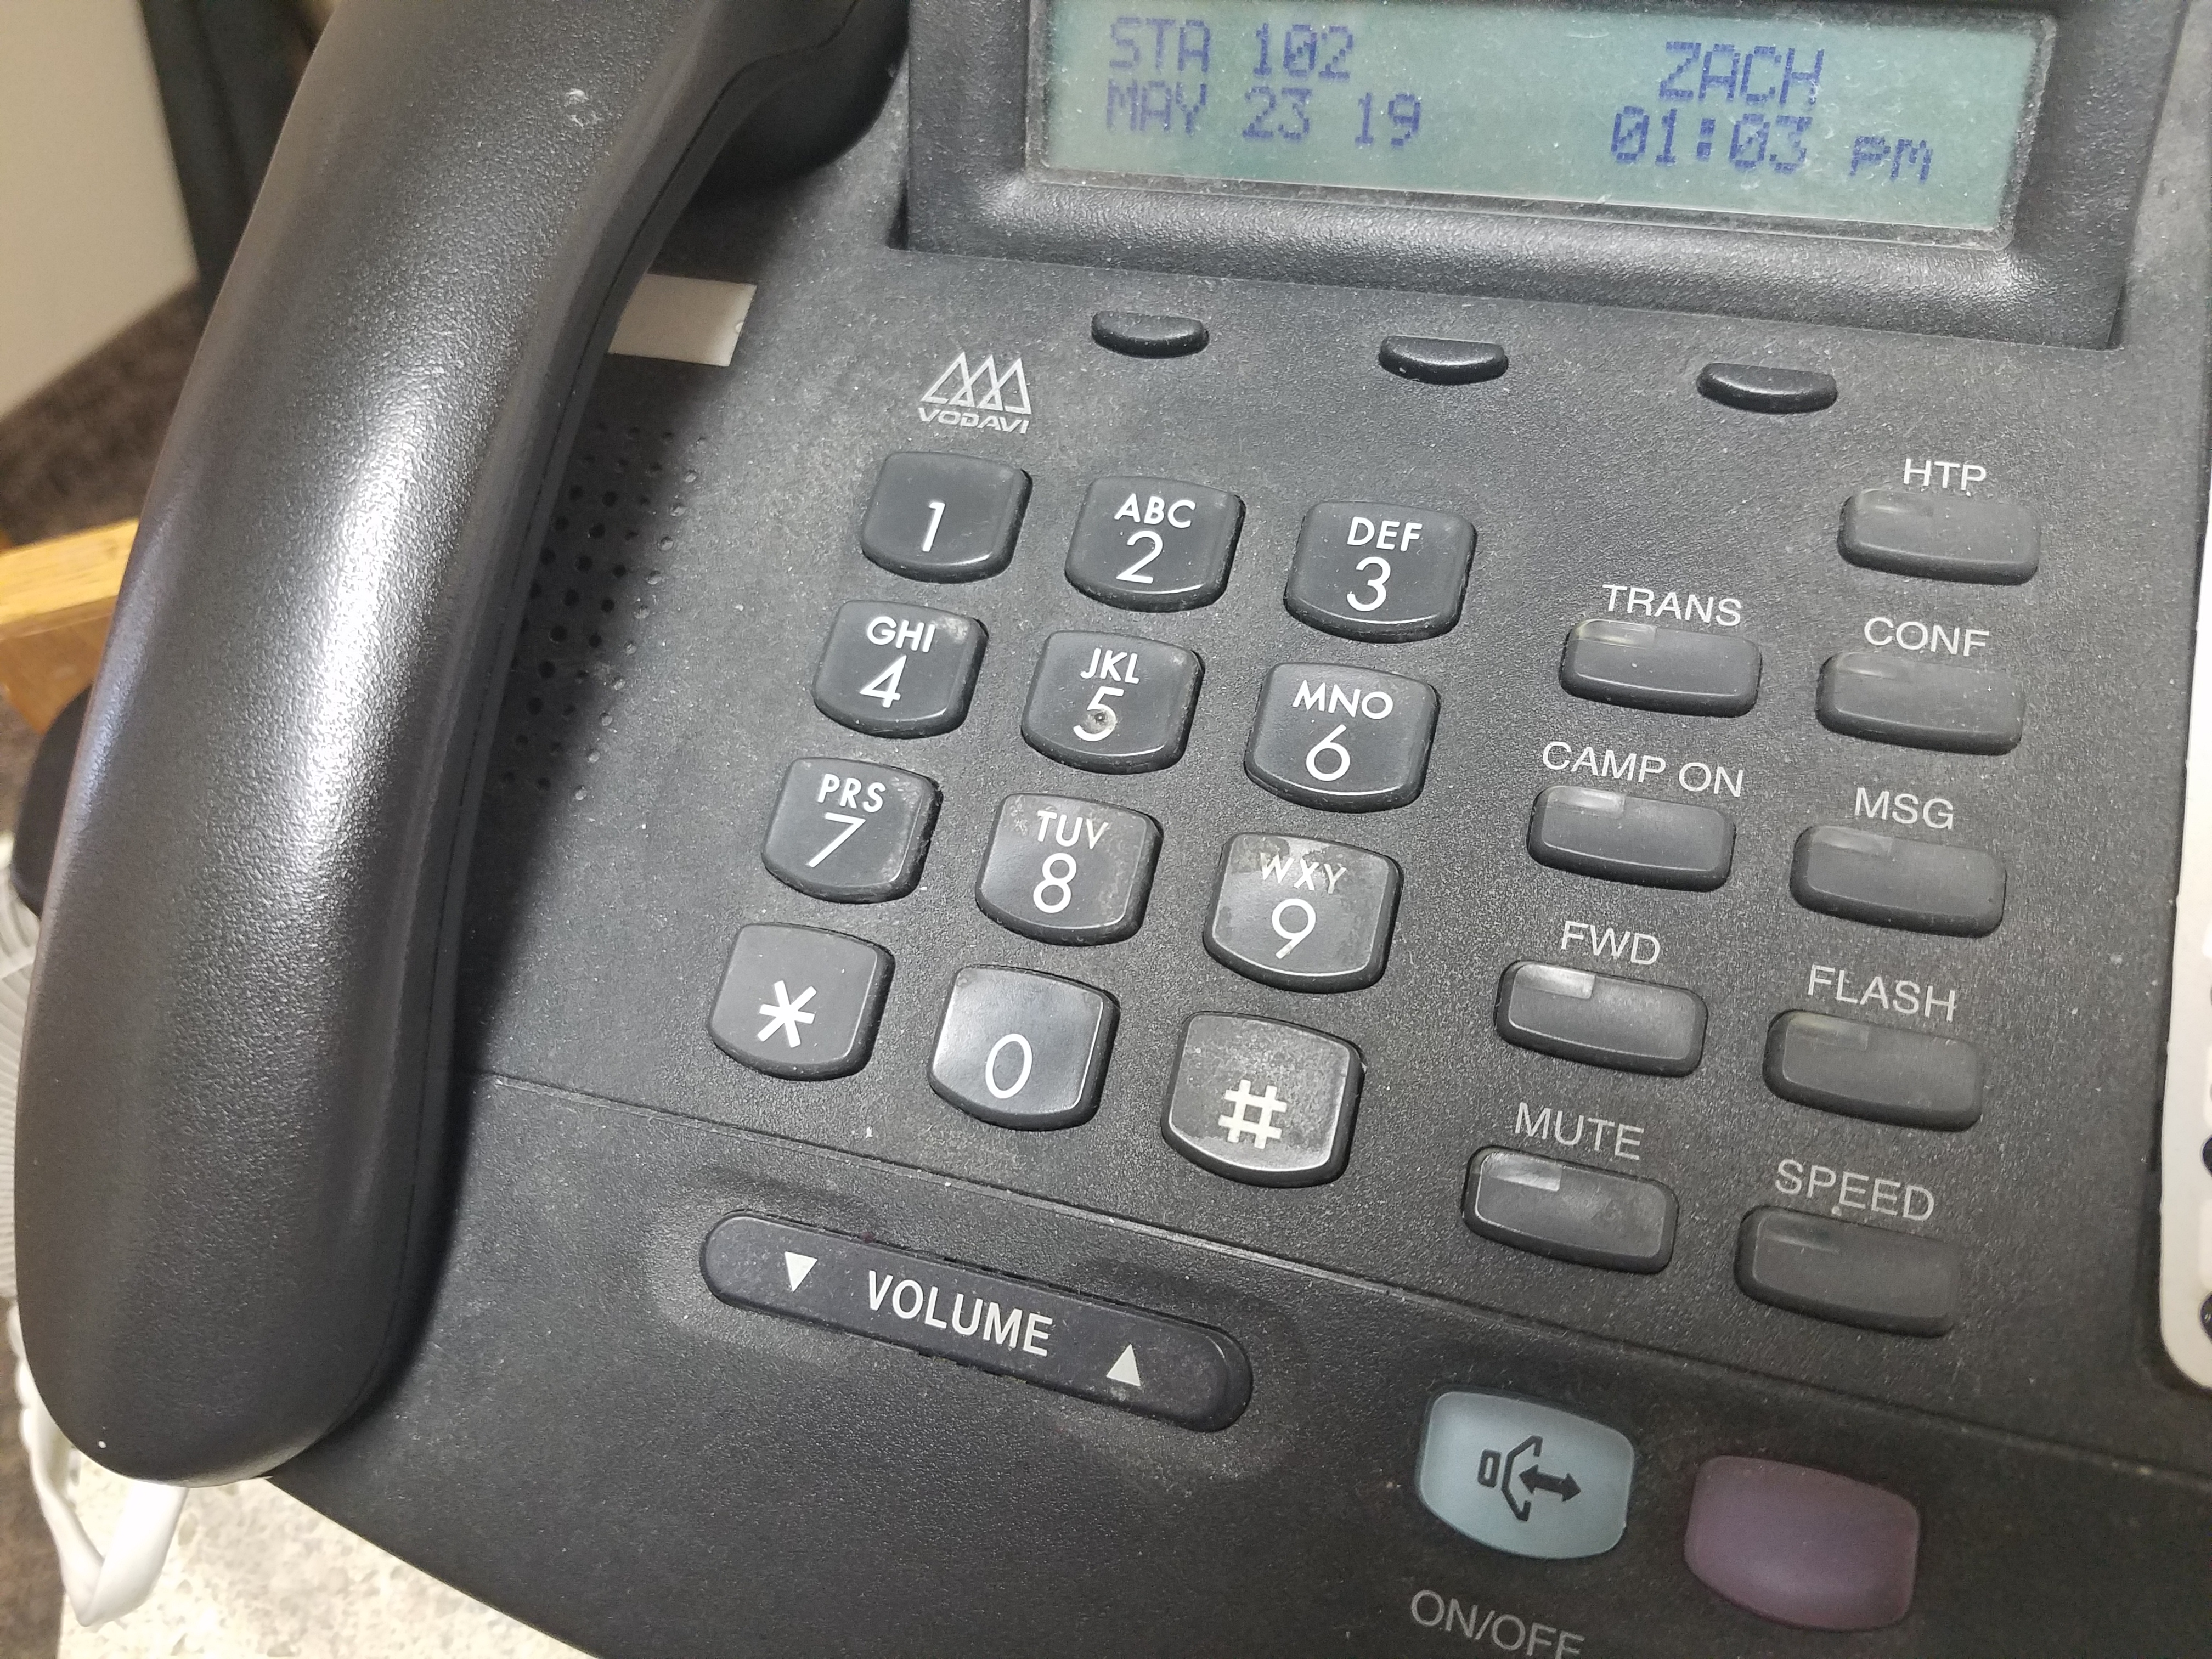 Mandatory 10-Digit Phone Number Use To Begin Later This Year